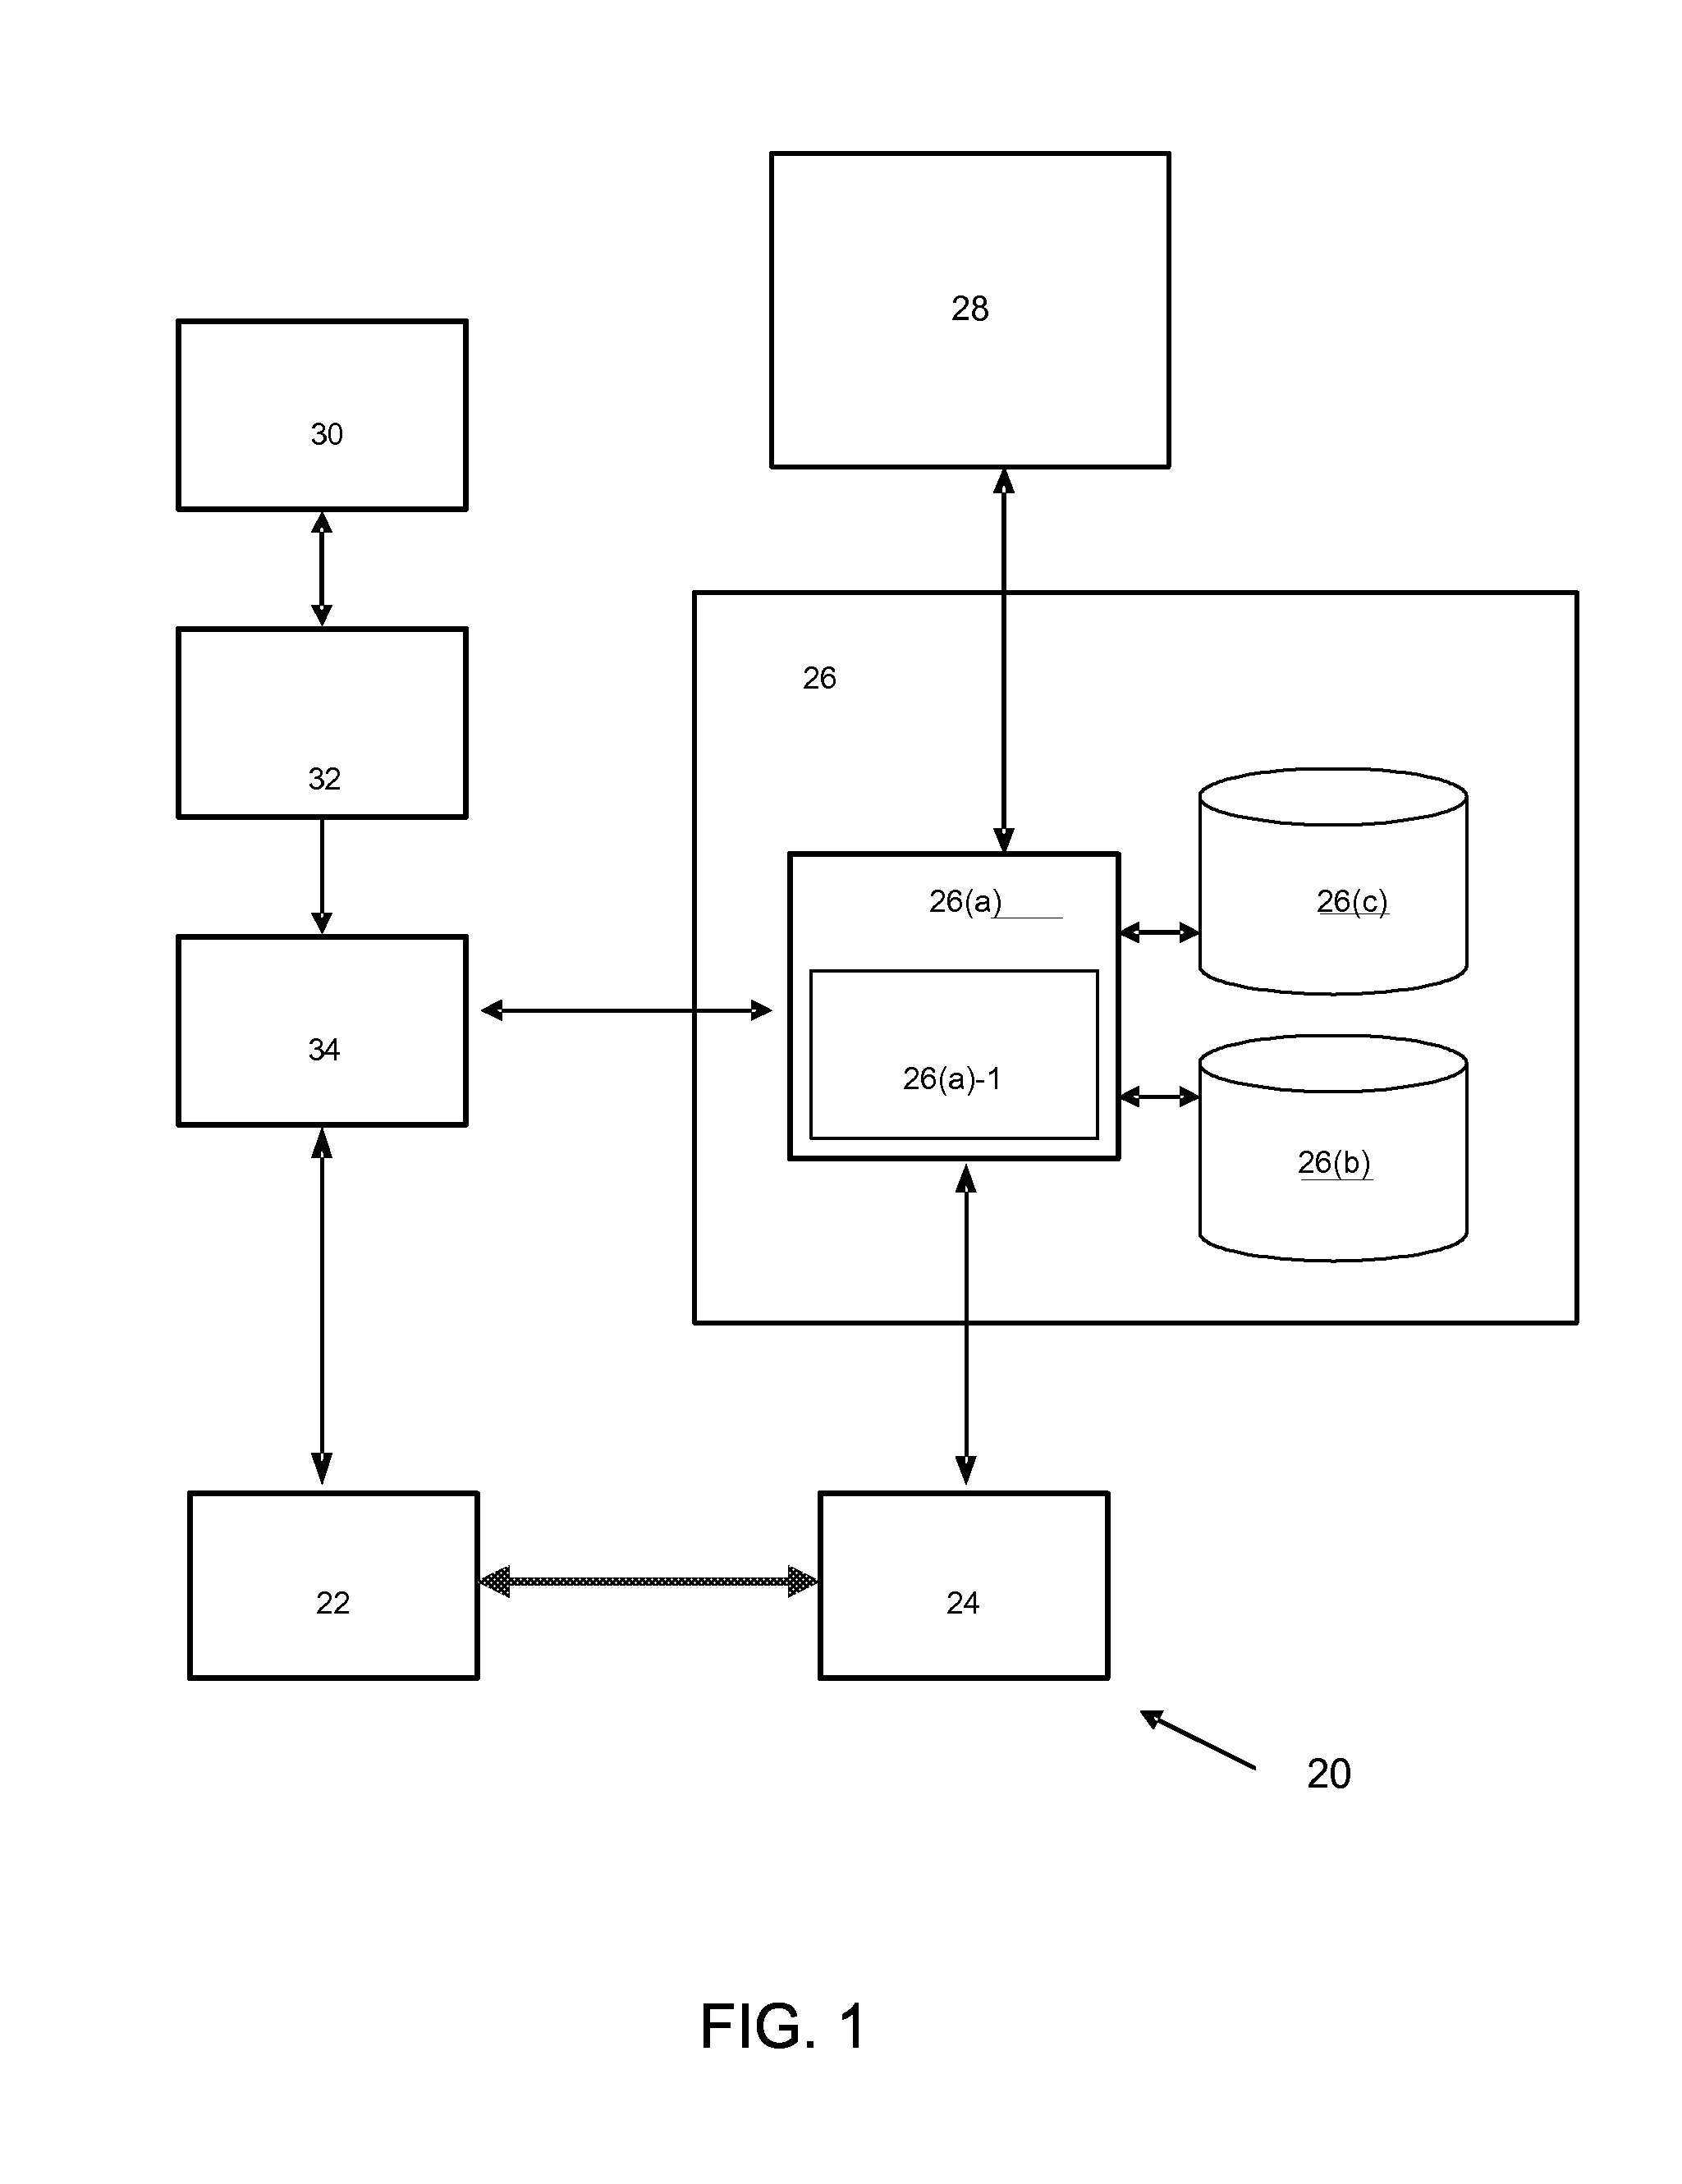 Systems and methods for secure and transparent cardless transactions